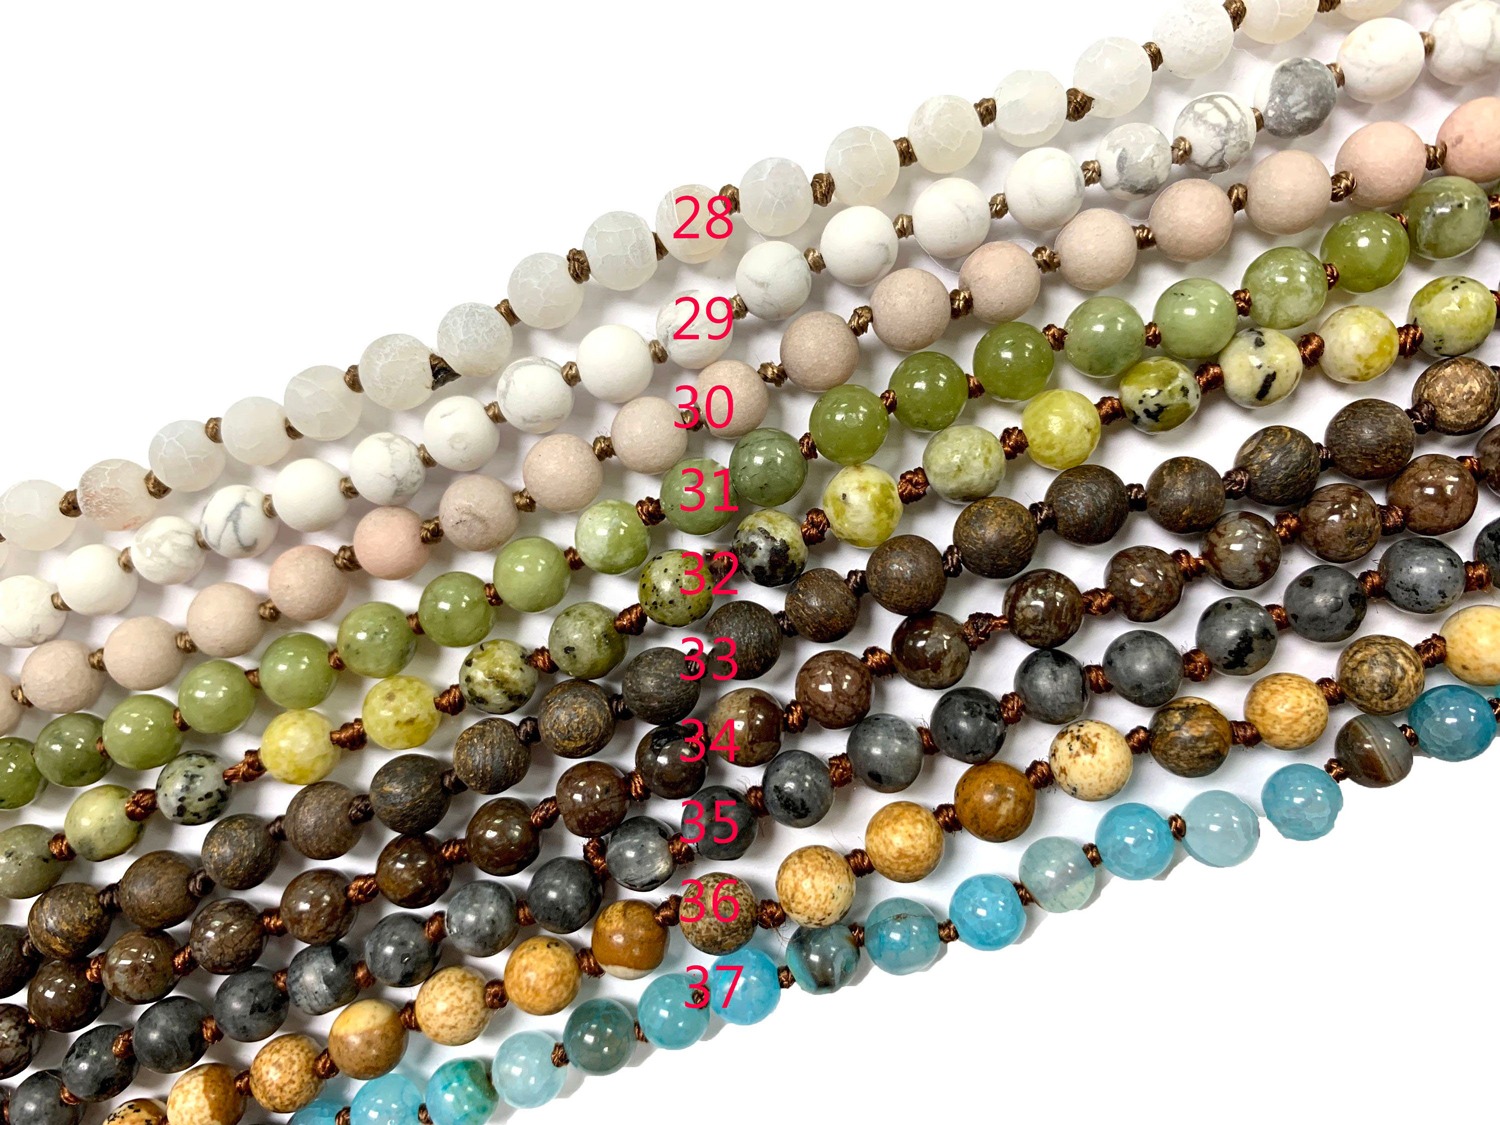 Handmade Double Knotted Gemstone Long Necklaces 52 inches long (6mm ...